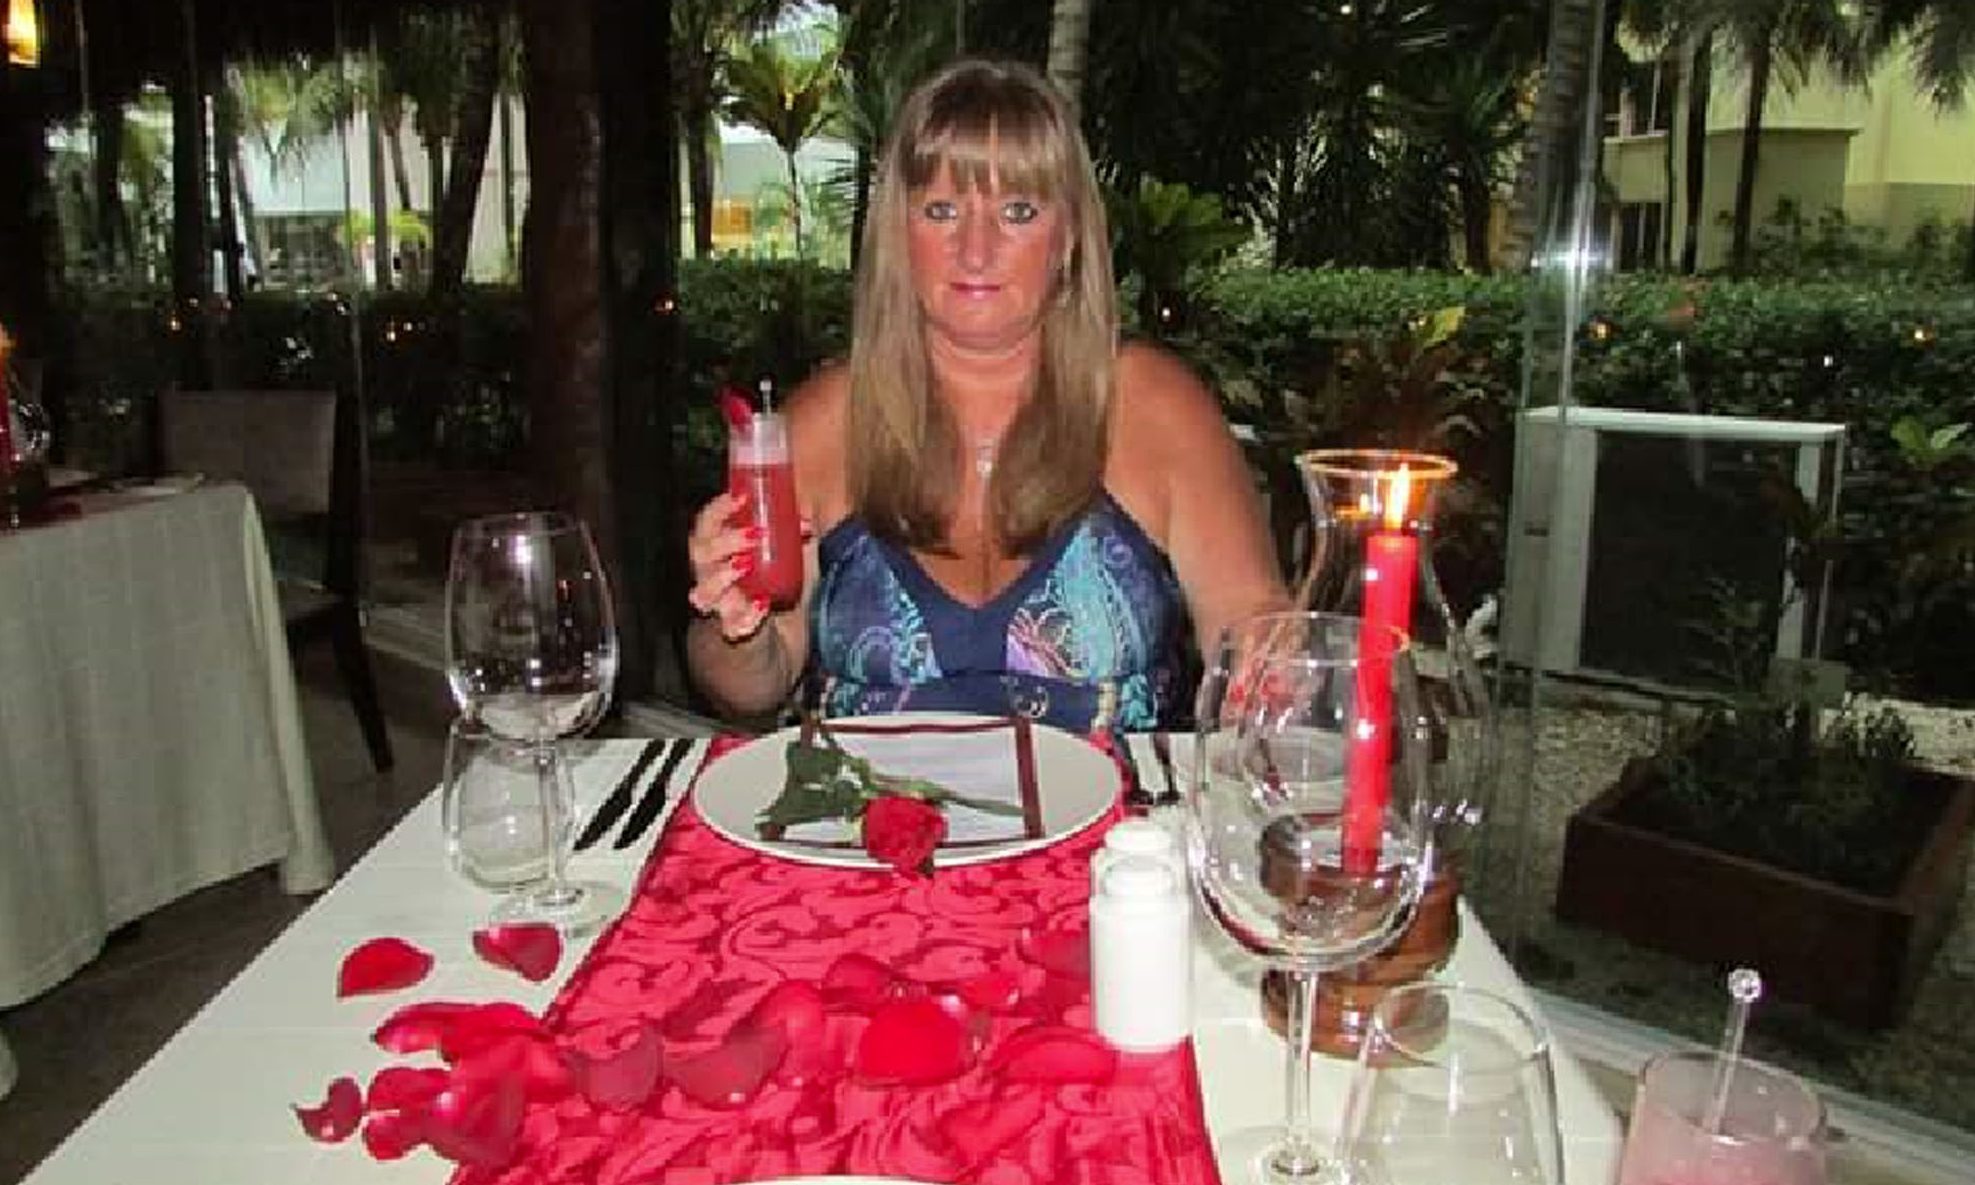 Julie Hughes, 55, from Runcorn, was ill for a month and lost a stone after she was infected with the cyclospora parasite on holiday in Mexico.